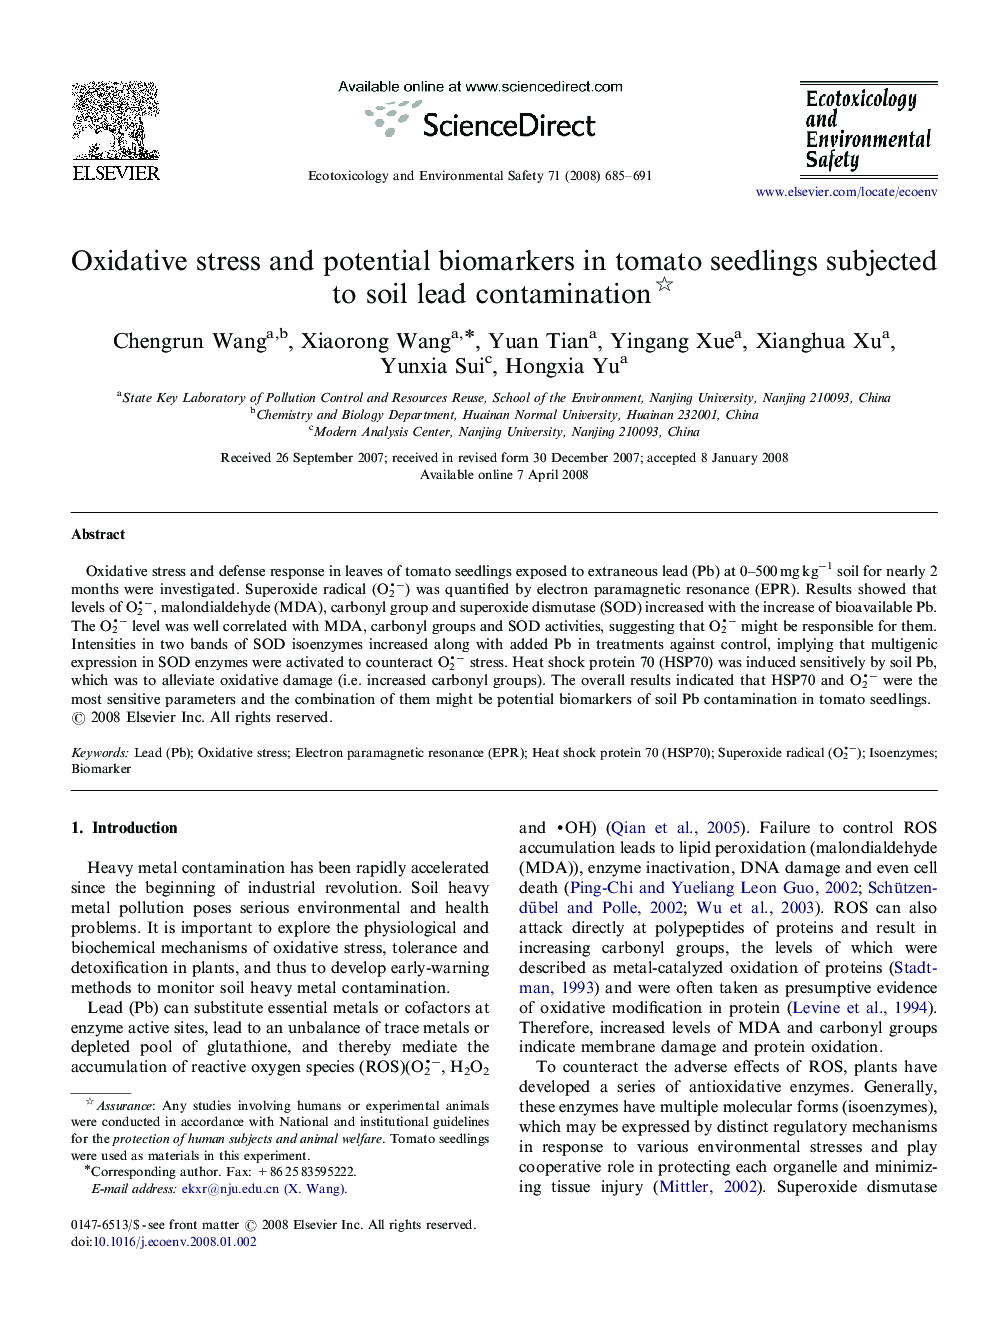 Oxidative stress and potential biomarkers in tomato seedlings subjected to soil lead contamination 